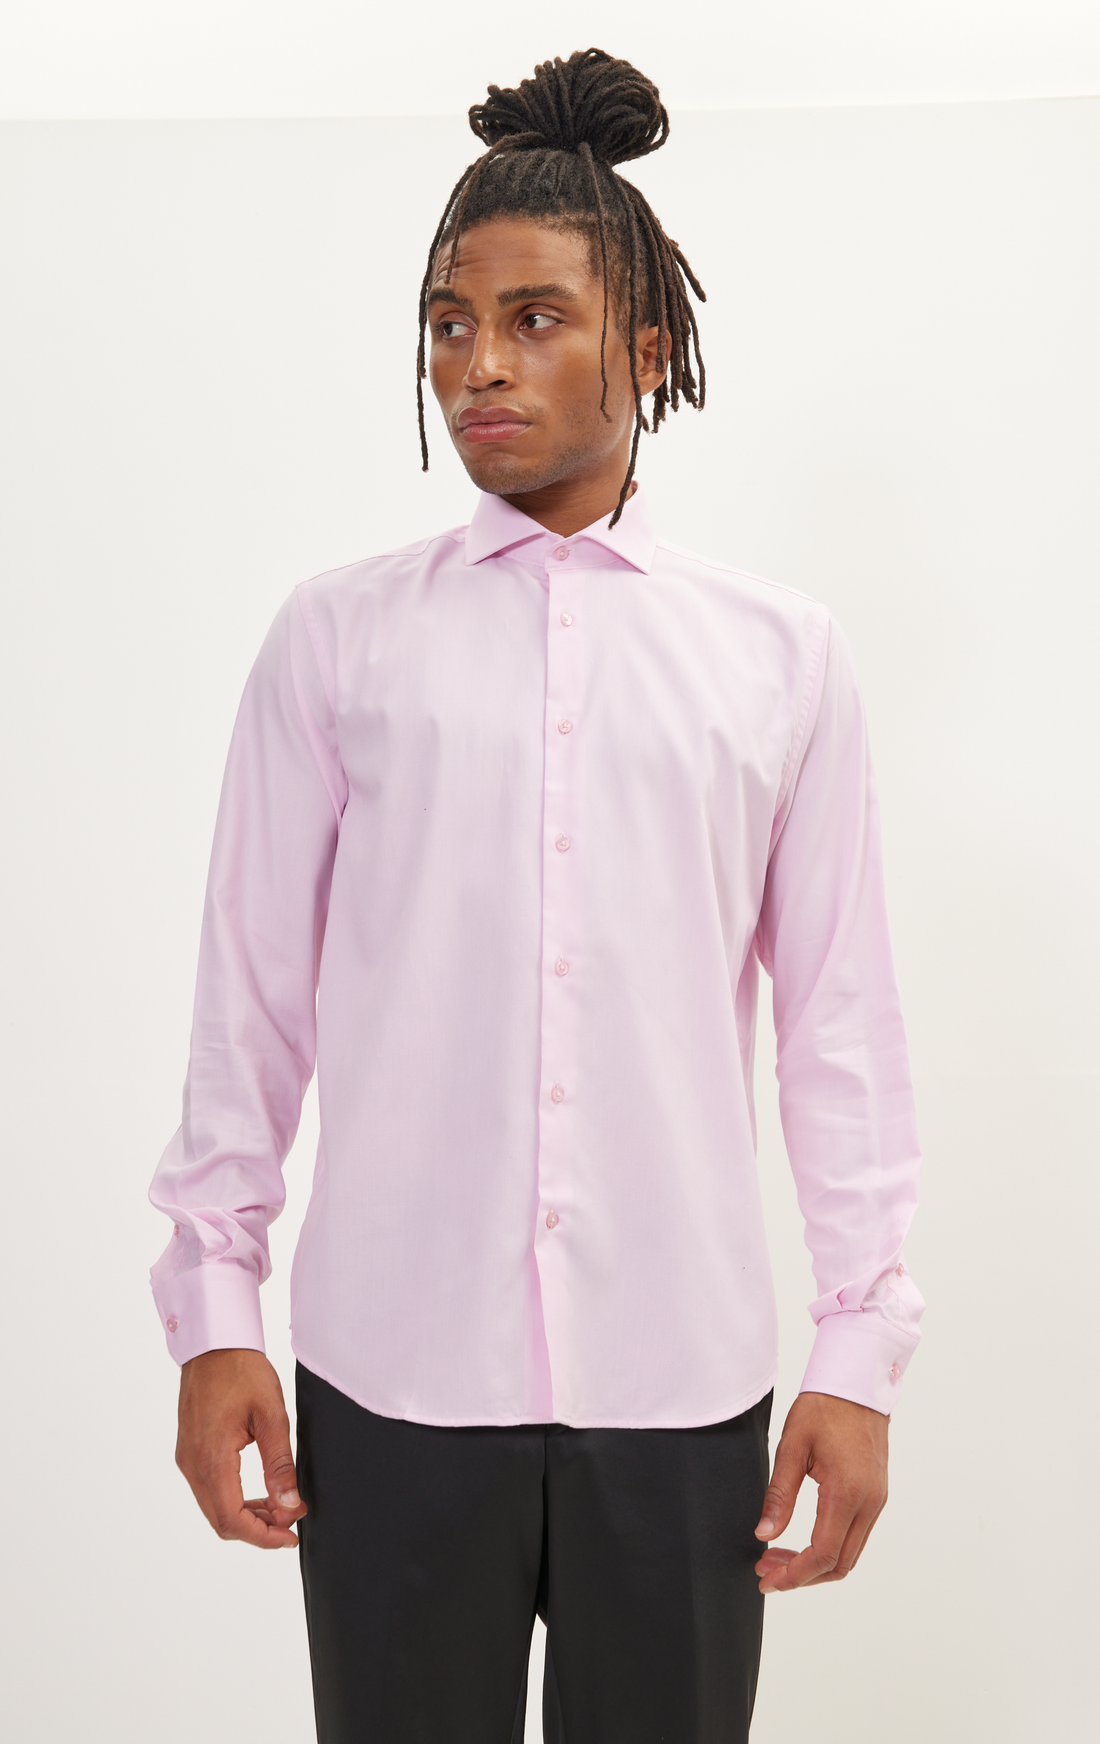 N° AN4902 PURE COTTON FRENCH PLACKET SPREAD COLLAR DRESS SHIRT - WHITE PINK OXFORD